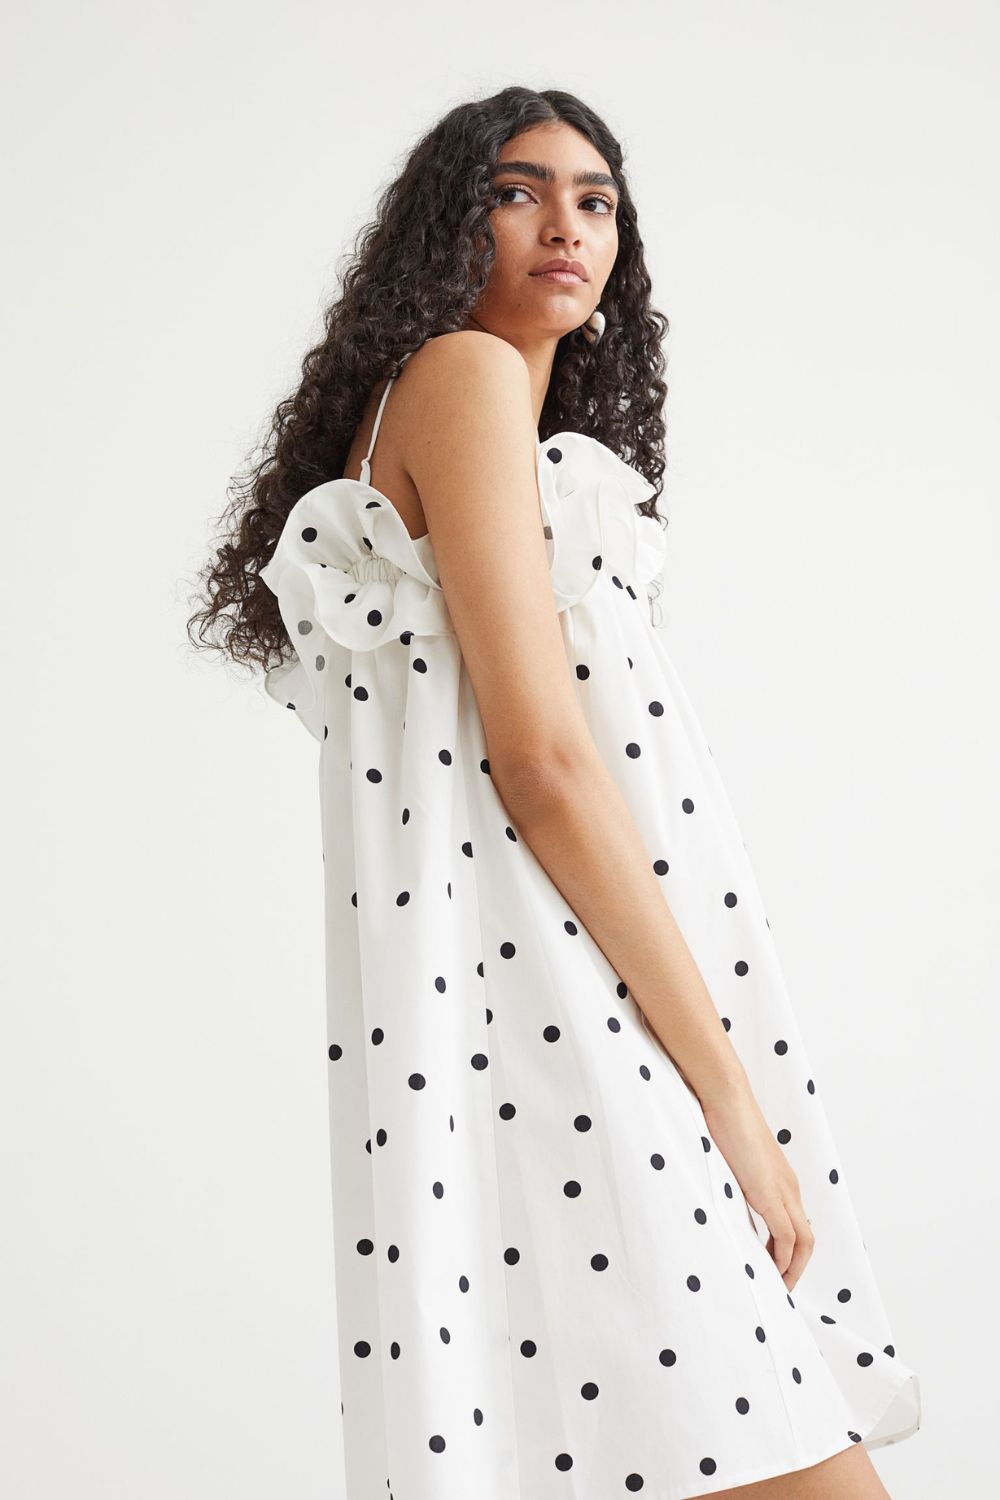 Dot, Dot, Dash: 5 Polka Dot Pieces For Summer In The City - The Gloss ...